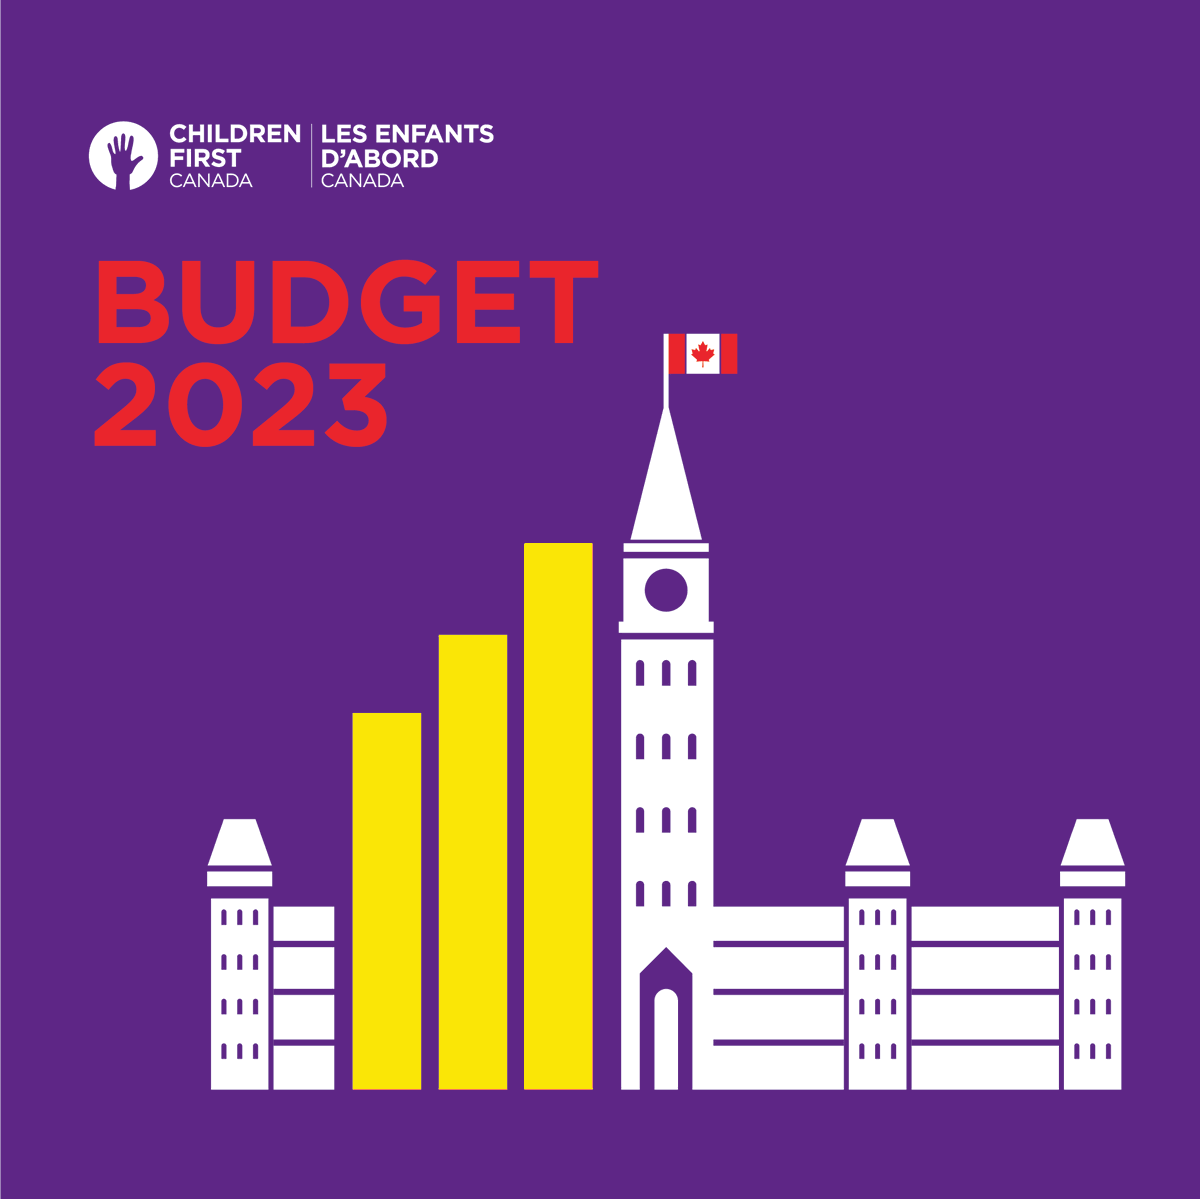 Budget 2023 delivers on healthcare, dental supports, and clean economy. Kids are not receiving the catalytic investment & strategy needed to support their development: childrenfirstcanada.org/featured/child…

#ChildrenFirst #CdnPoli #Budget2023  @JustinTrudeau @cafreeland @MarciIen @karinagould